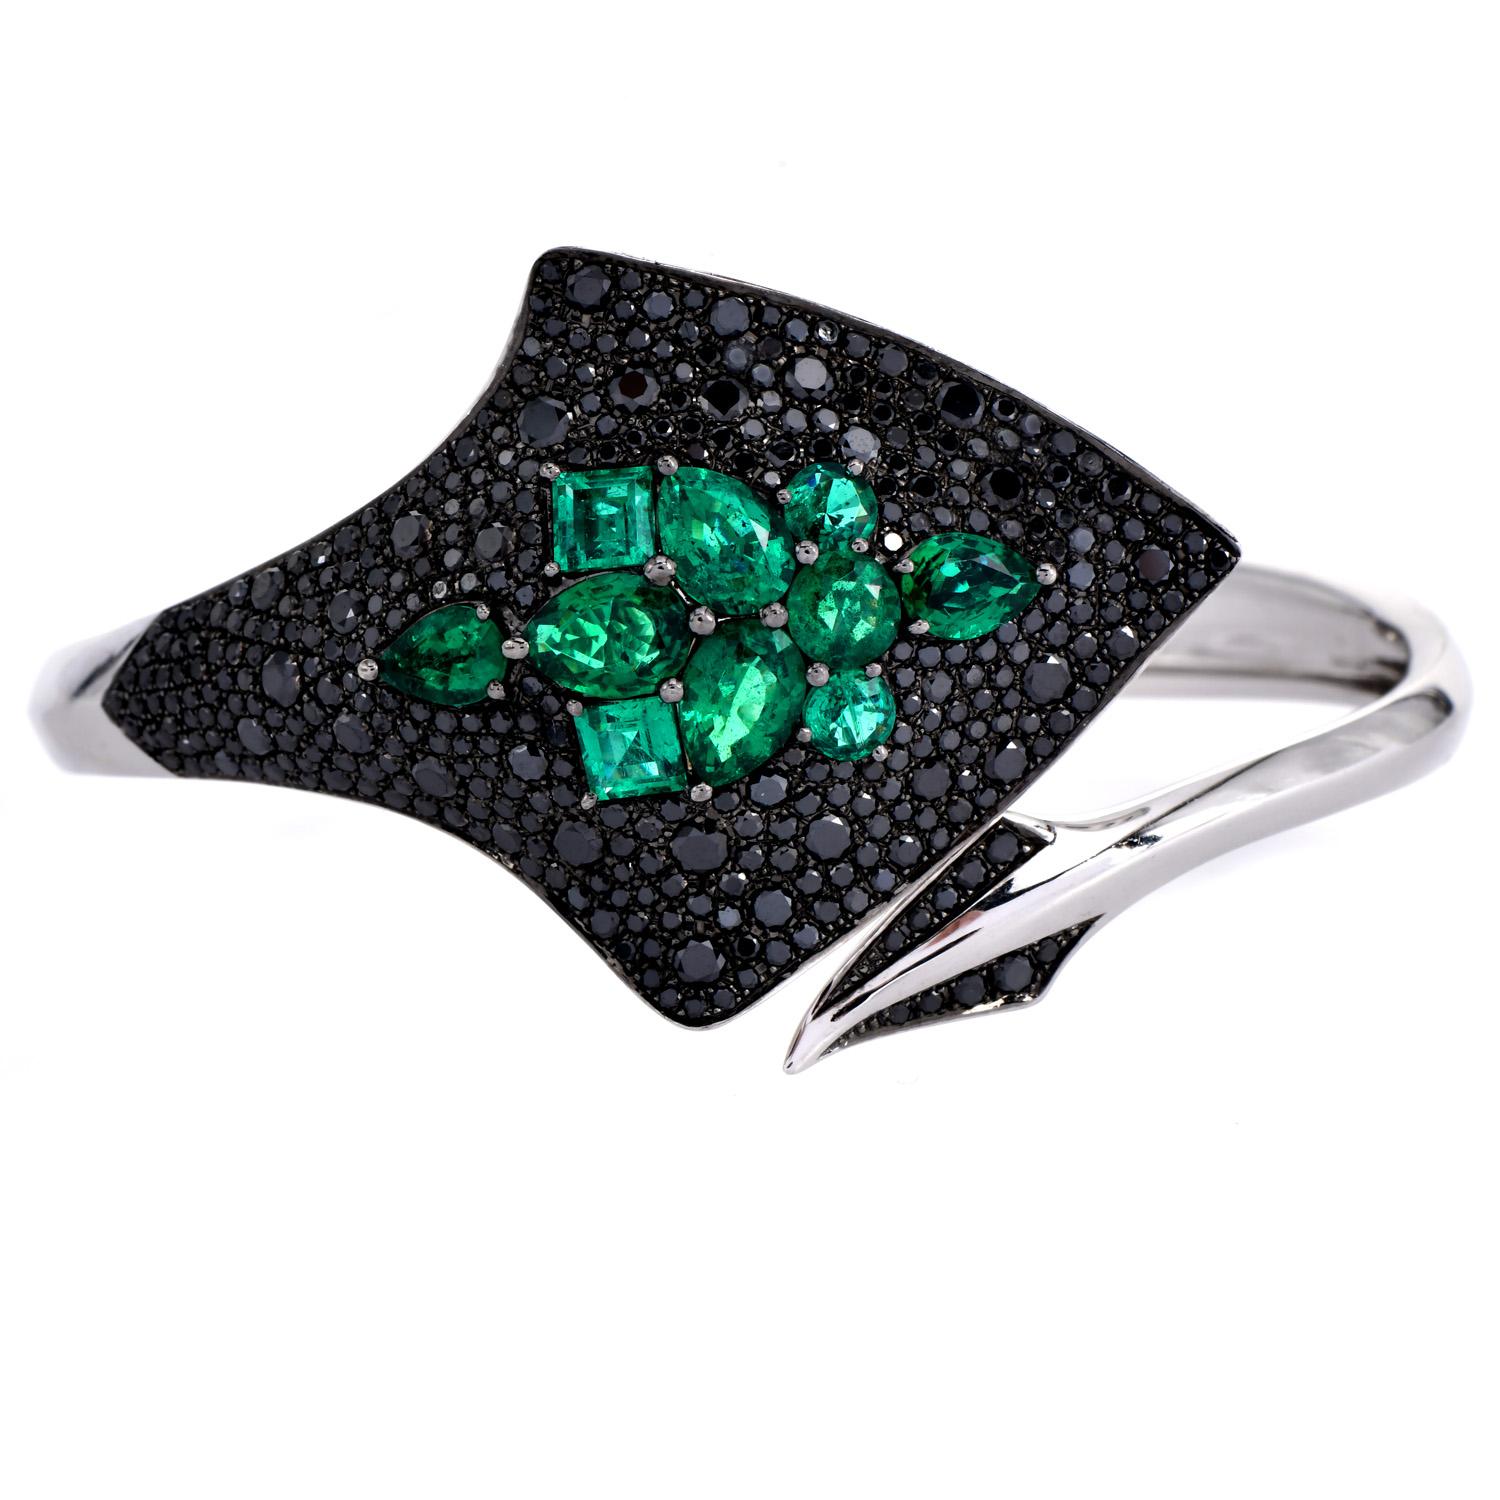 Stephen Webster's 18-carat White Gold Couture Stingray Cuff Bracelet.

Renowned for its exquisite craftsmanship and creativity. Impeccably designed with a harmonious blend of black and white diamonds along with vibrant green emeralds. 

The bracelet